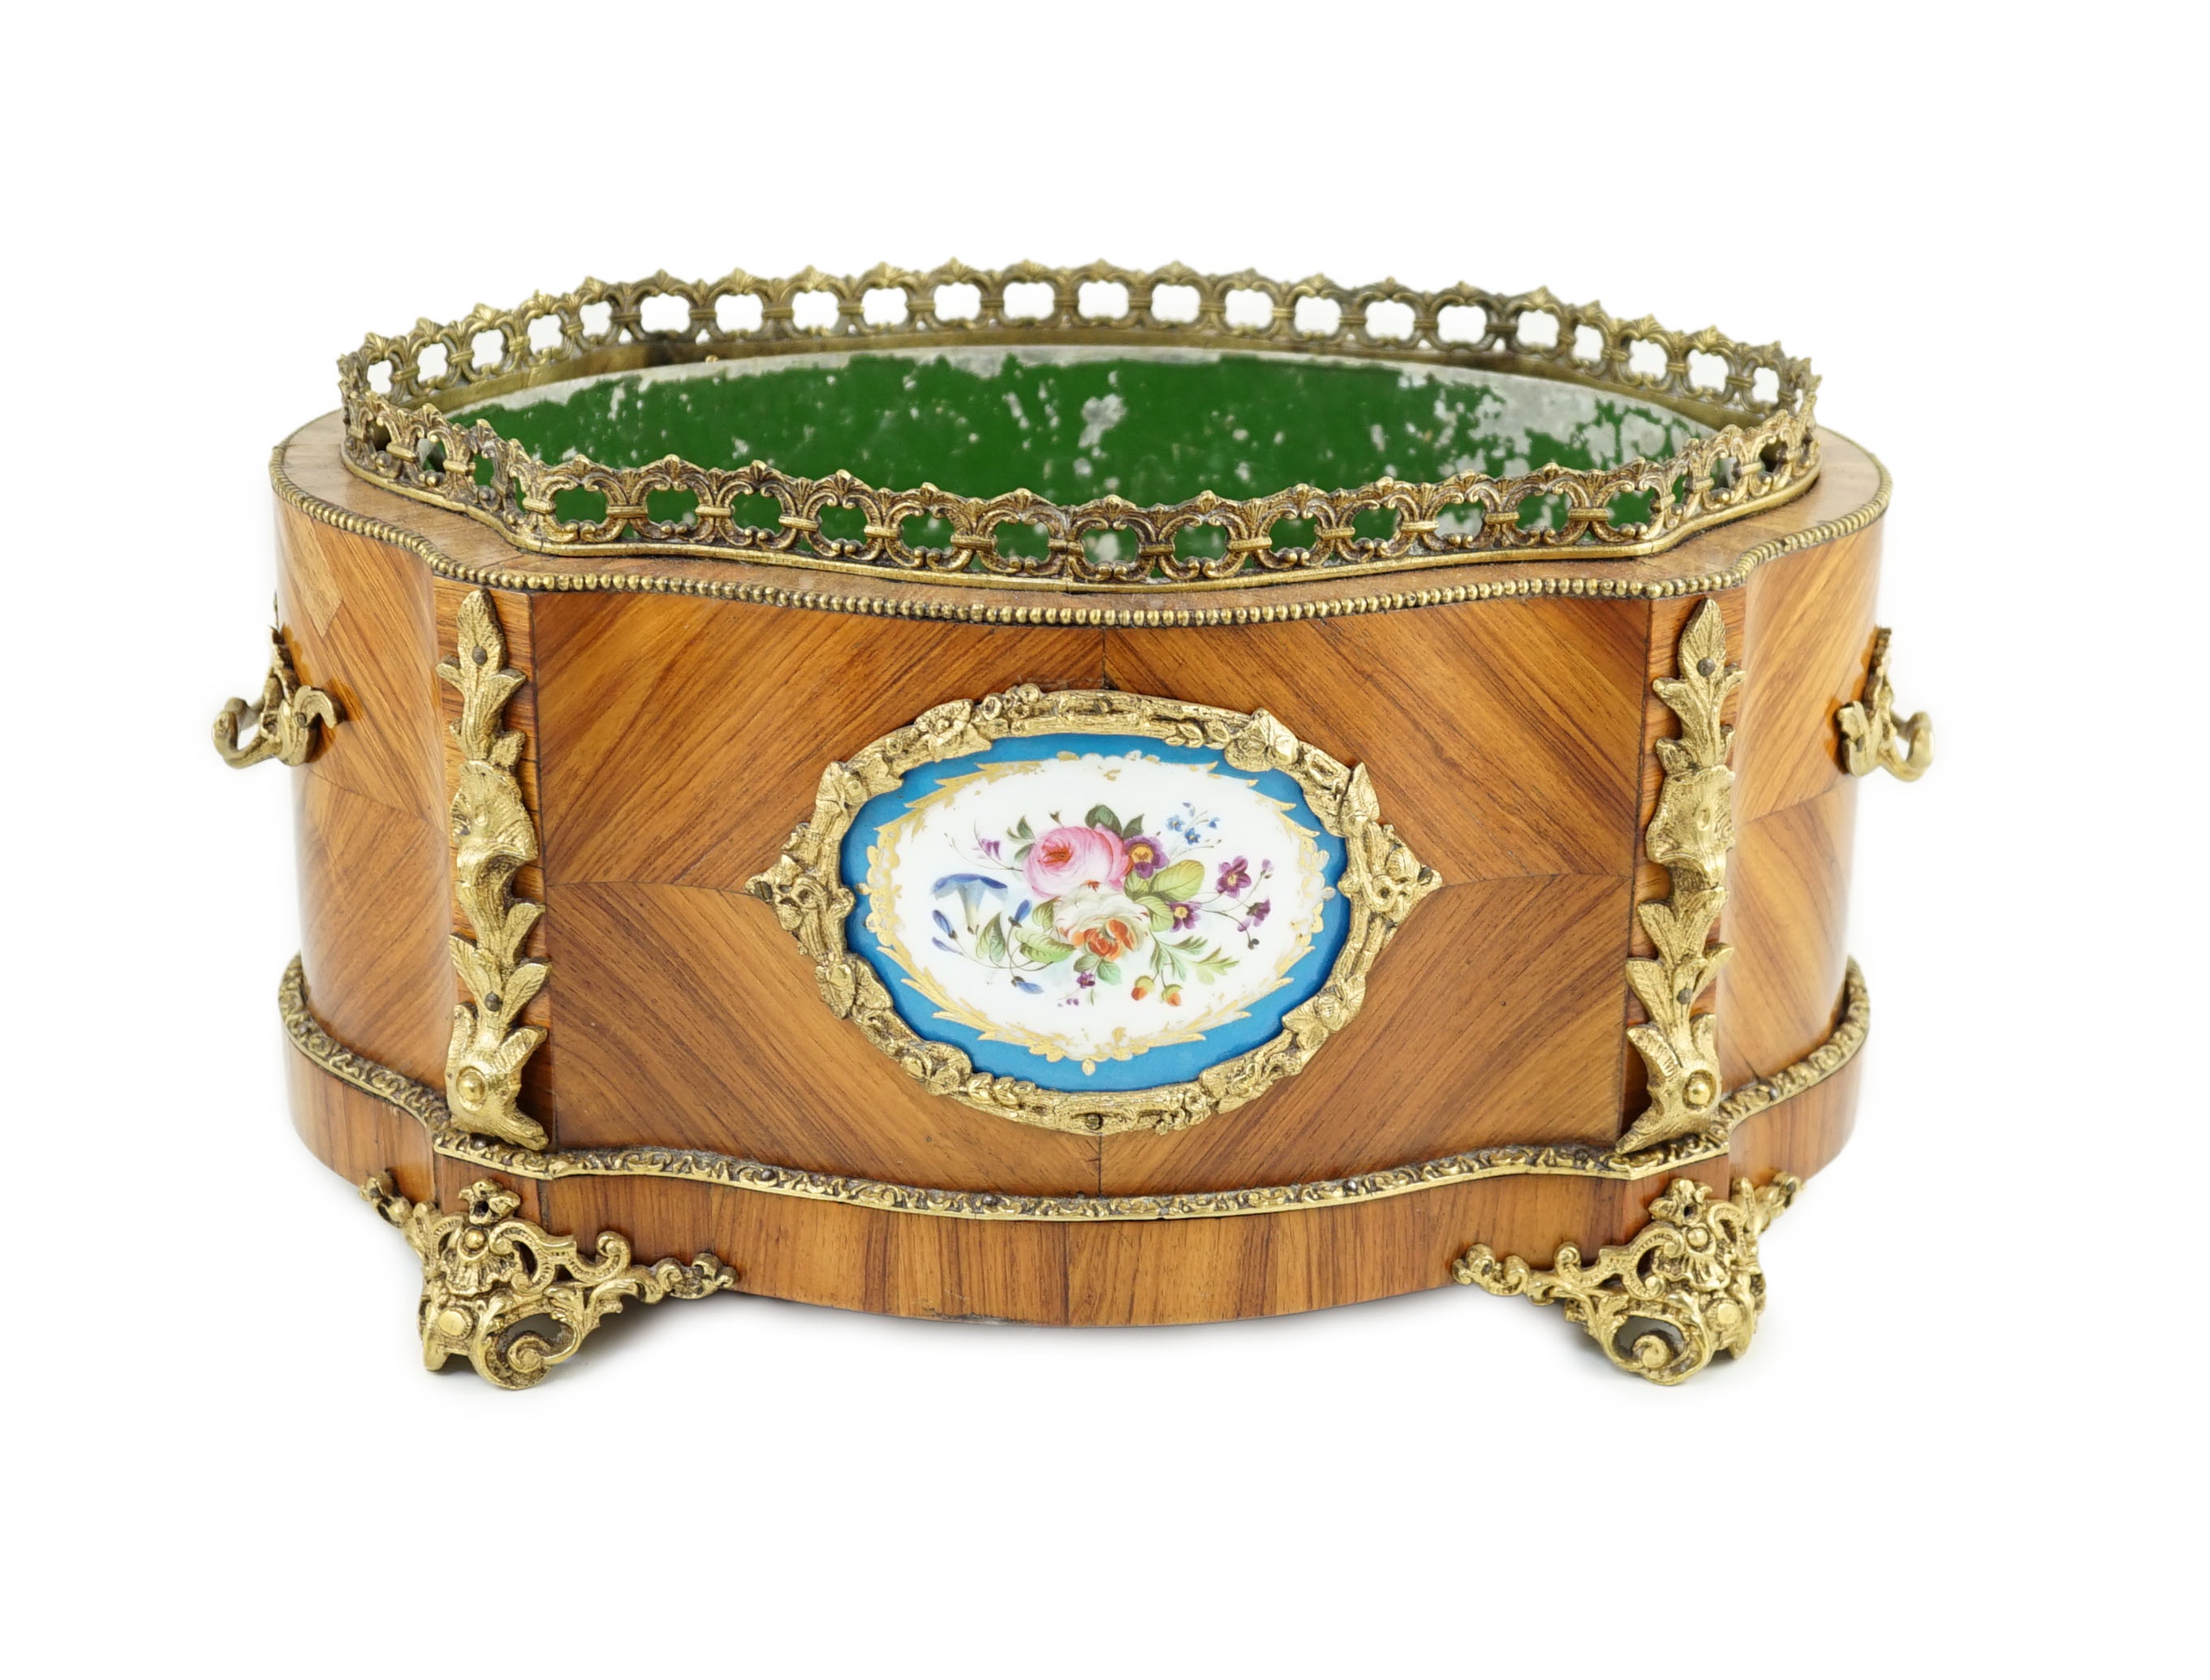 19th-century French Kingwood and ormolu mounted centrepiece planter, inset with a Sevres style porcelain plaque - 41cm wide